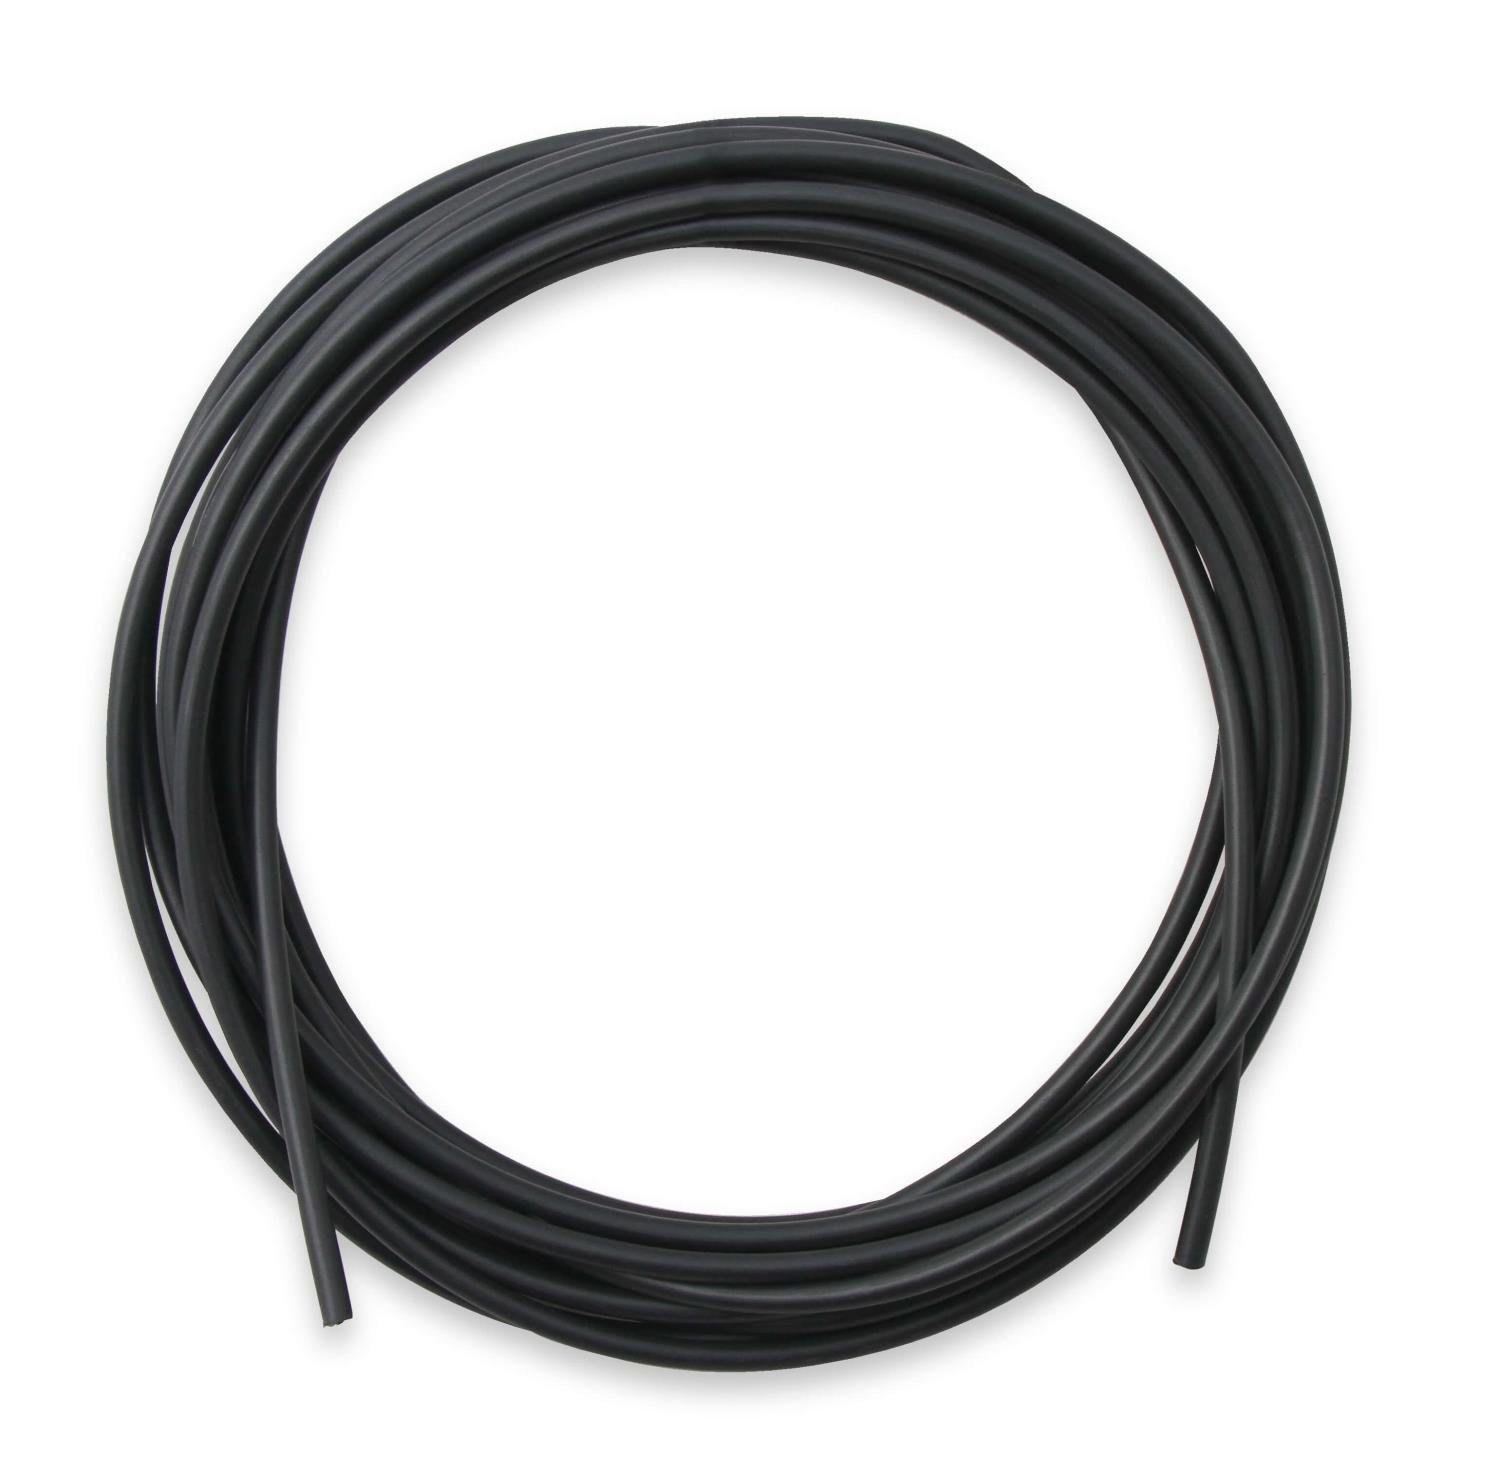 EFI Shielded 3 Conductor Cable in 25 ft. Length